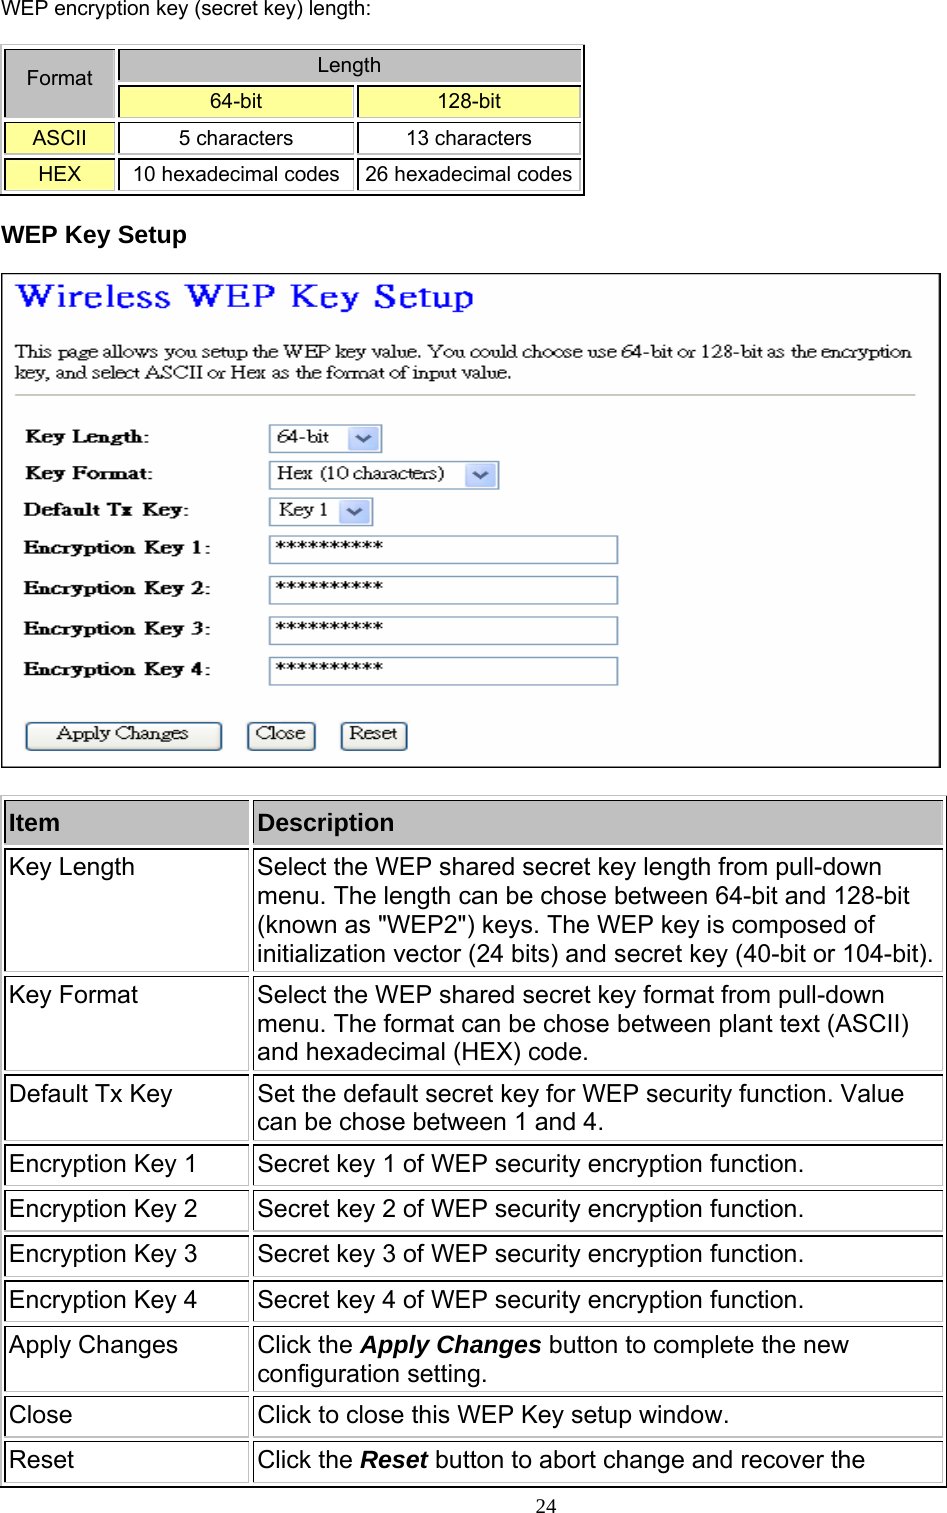   WEP encryption key (secret key) length:    Length Format  64-bit  128-bit  ASCII    5 characters    13 characters   HEX    10 hexadecimal codes  26 hexadecimal codes WEP Key Setup                        Item  Description Key Length  Select the WEP shared secret key length from pull-down menu. The length can be chose between 64-bit and 128-bit (known as &quot;WEP2&quot;) keys. The WEP key is composed of initialization vector (24 bits) and secret key (40-bit or 104-bit). Key Format  Select the WEP shared secret key format from pull-down menu. The format can be chose between plant text (ASCII) and hexadecimal (HEX) code. Default Tx Key  Set the default secret key for WEP security function. Value can be chose between 1 and 4. Encryption Key 1  Secret key 1 of WEP security encryption function. Encryption Key 2  Secret key 2 of WEP security encryption function. Encryption Key 3  Secret key 3 of WEP security encryption function. Encryption Key 4  Secret key 4 of WEP security encryption function. Apply Changes  Click the Apply Changes button to complete the new configuration setting. Close  Click to close this WEP Key setup window. Reset Click the Reset button to abort change and recover the     24